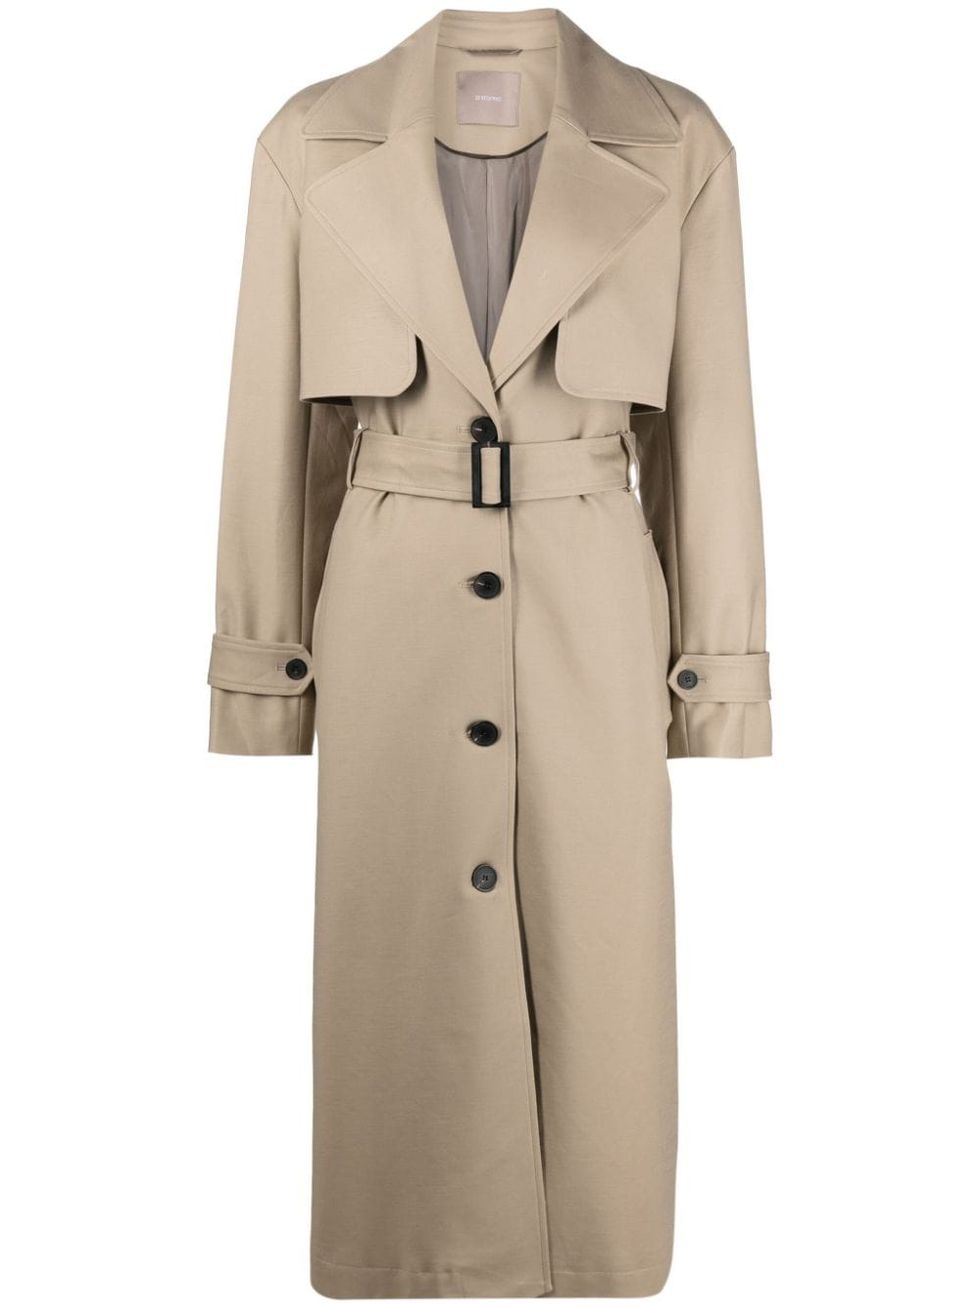 Shop 20 Perfect Trench Coats